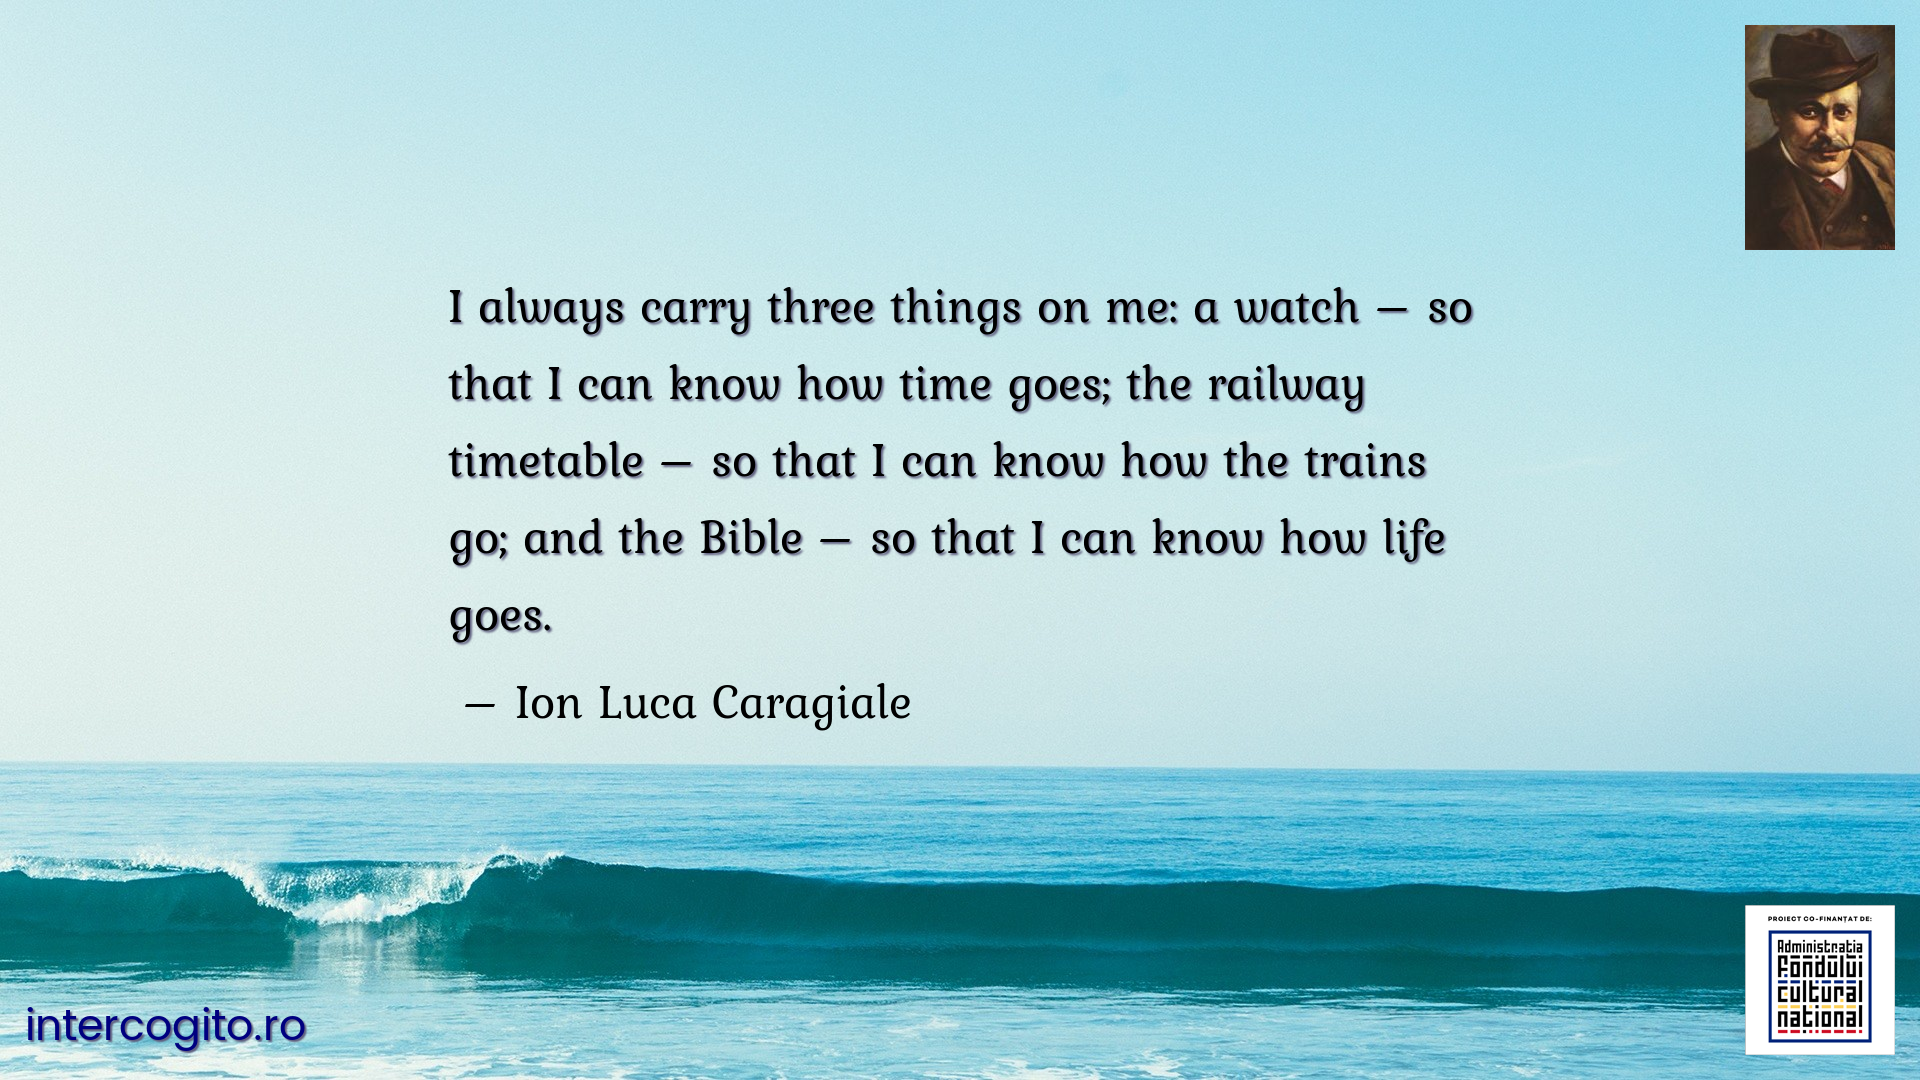 I always carry three things on me: a watch – so that I can know how time goes; the railway timetable – so that I can know how the trains go; and the Bible – so that I can know how life goes.